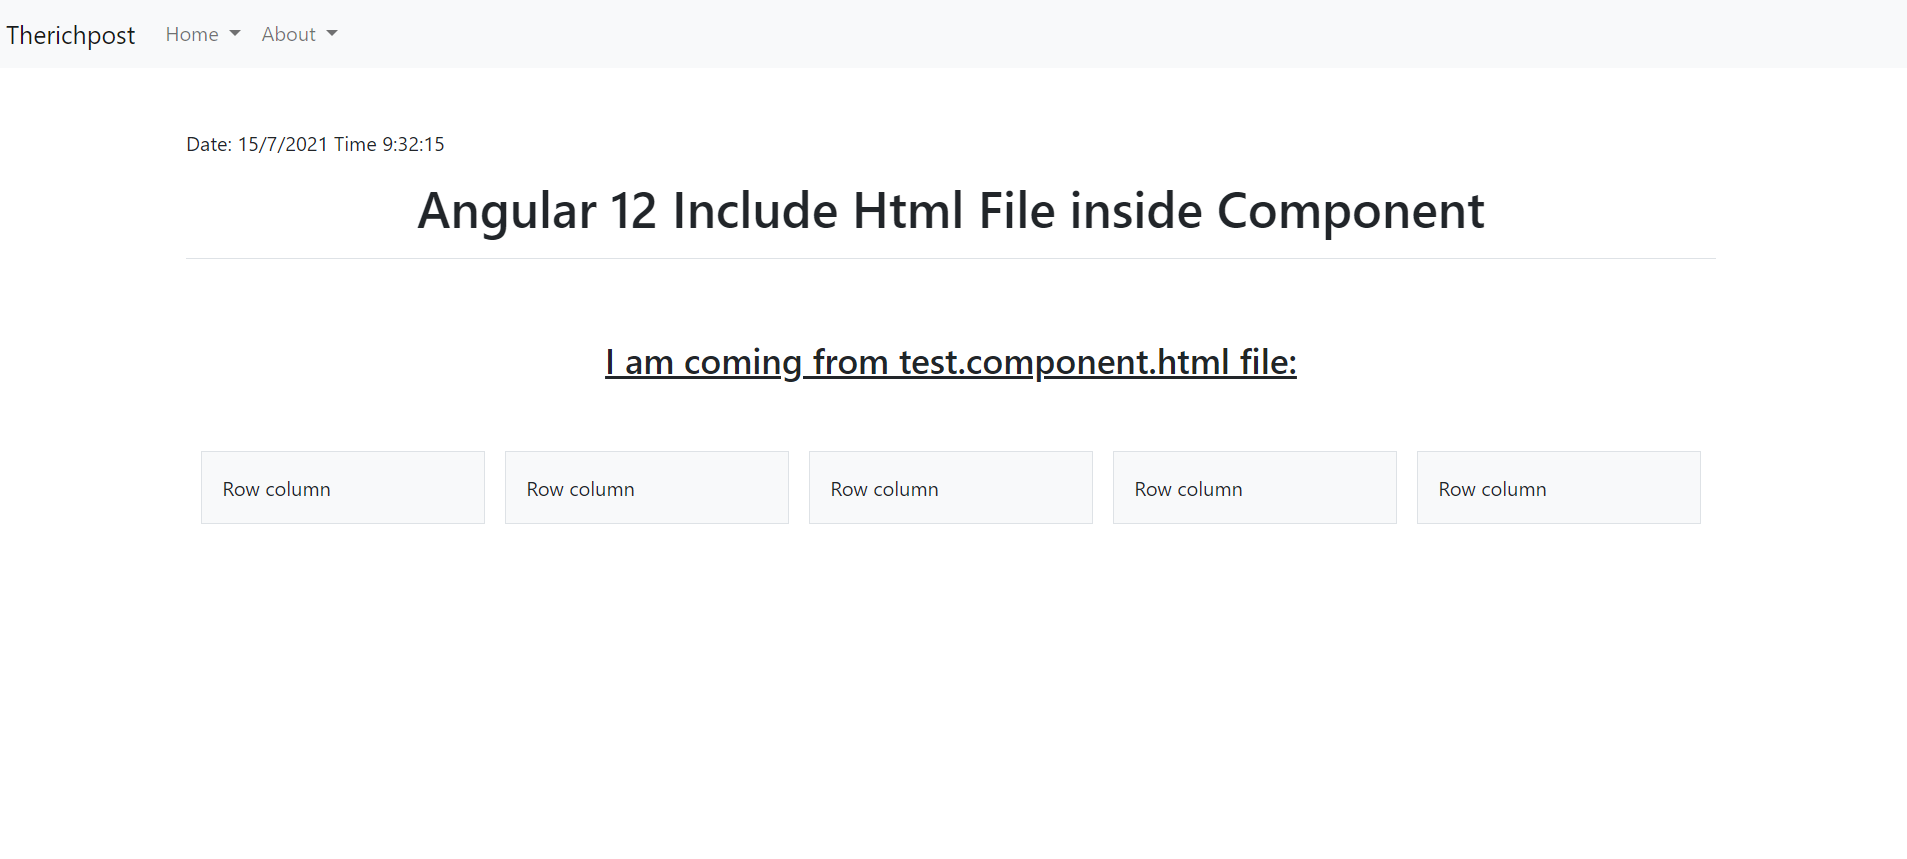 How to include html file in angular 12 component?